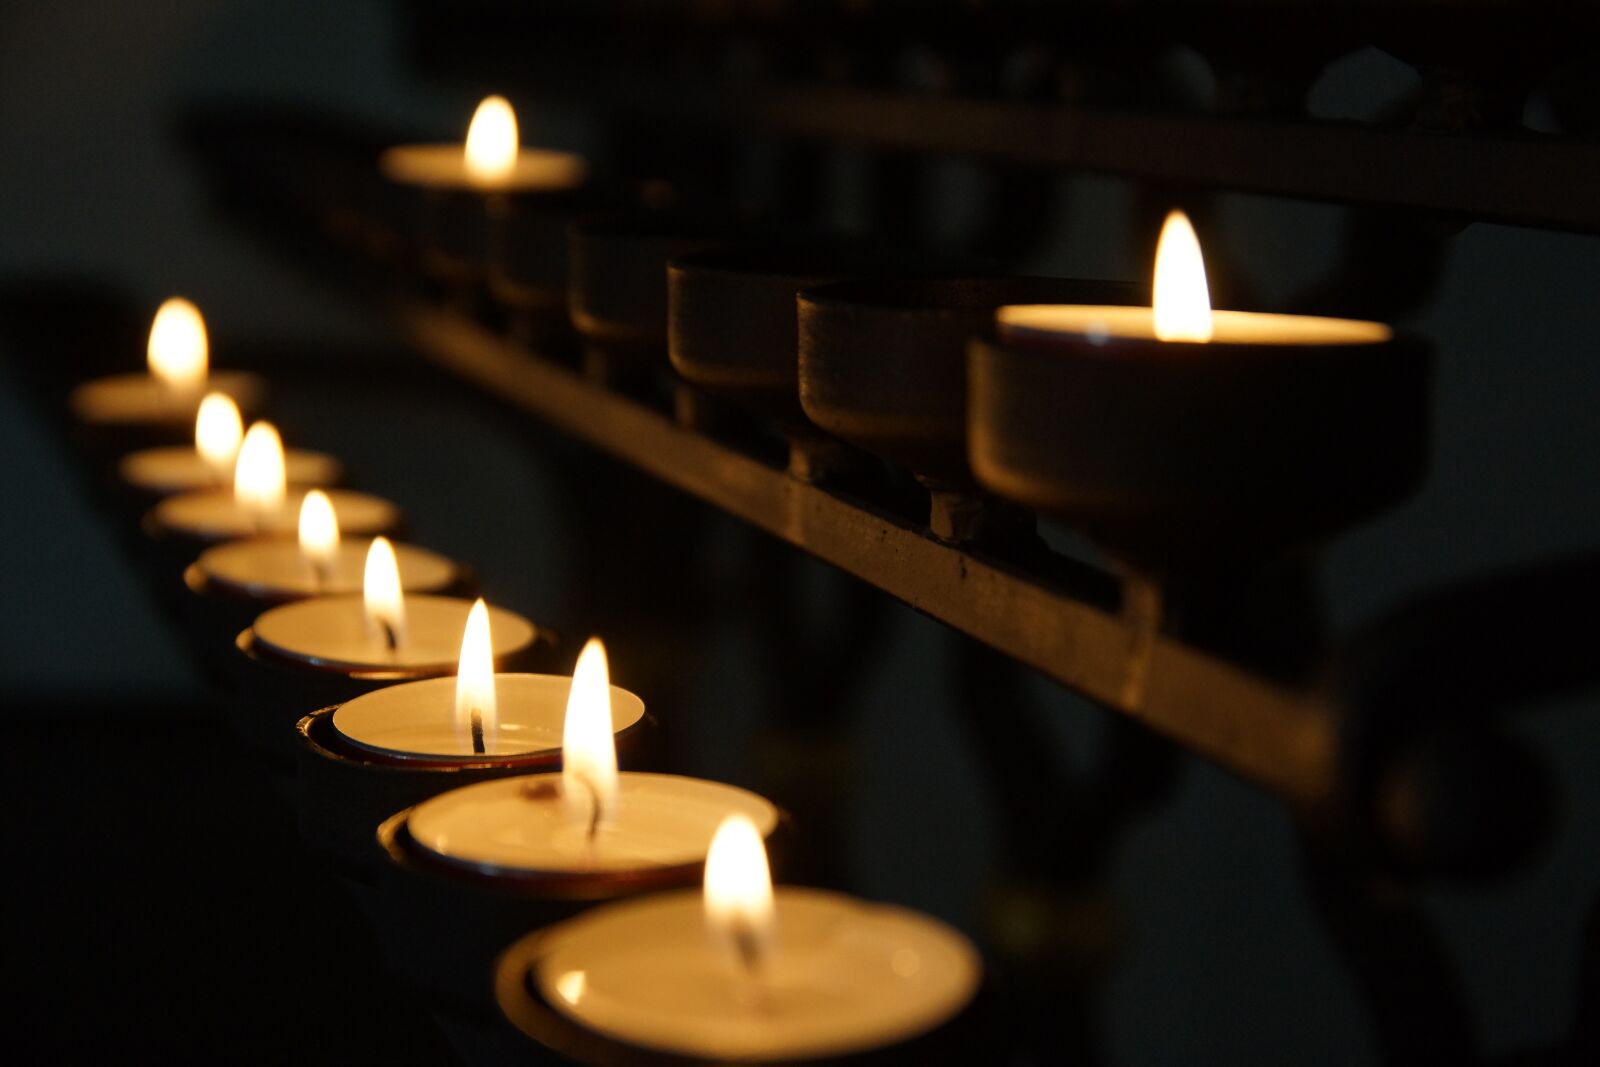 17-50mm F2.8 sample photo. Church, candles, light photography